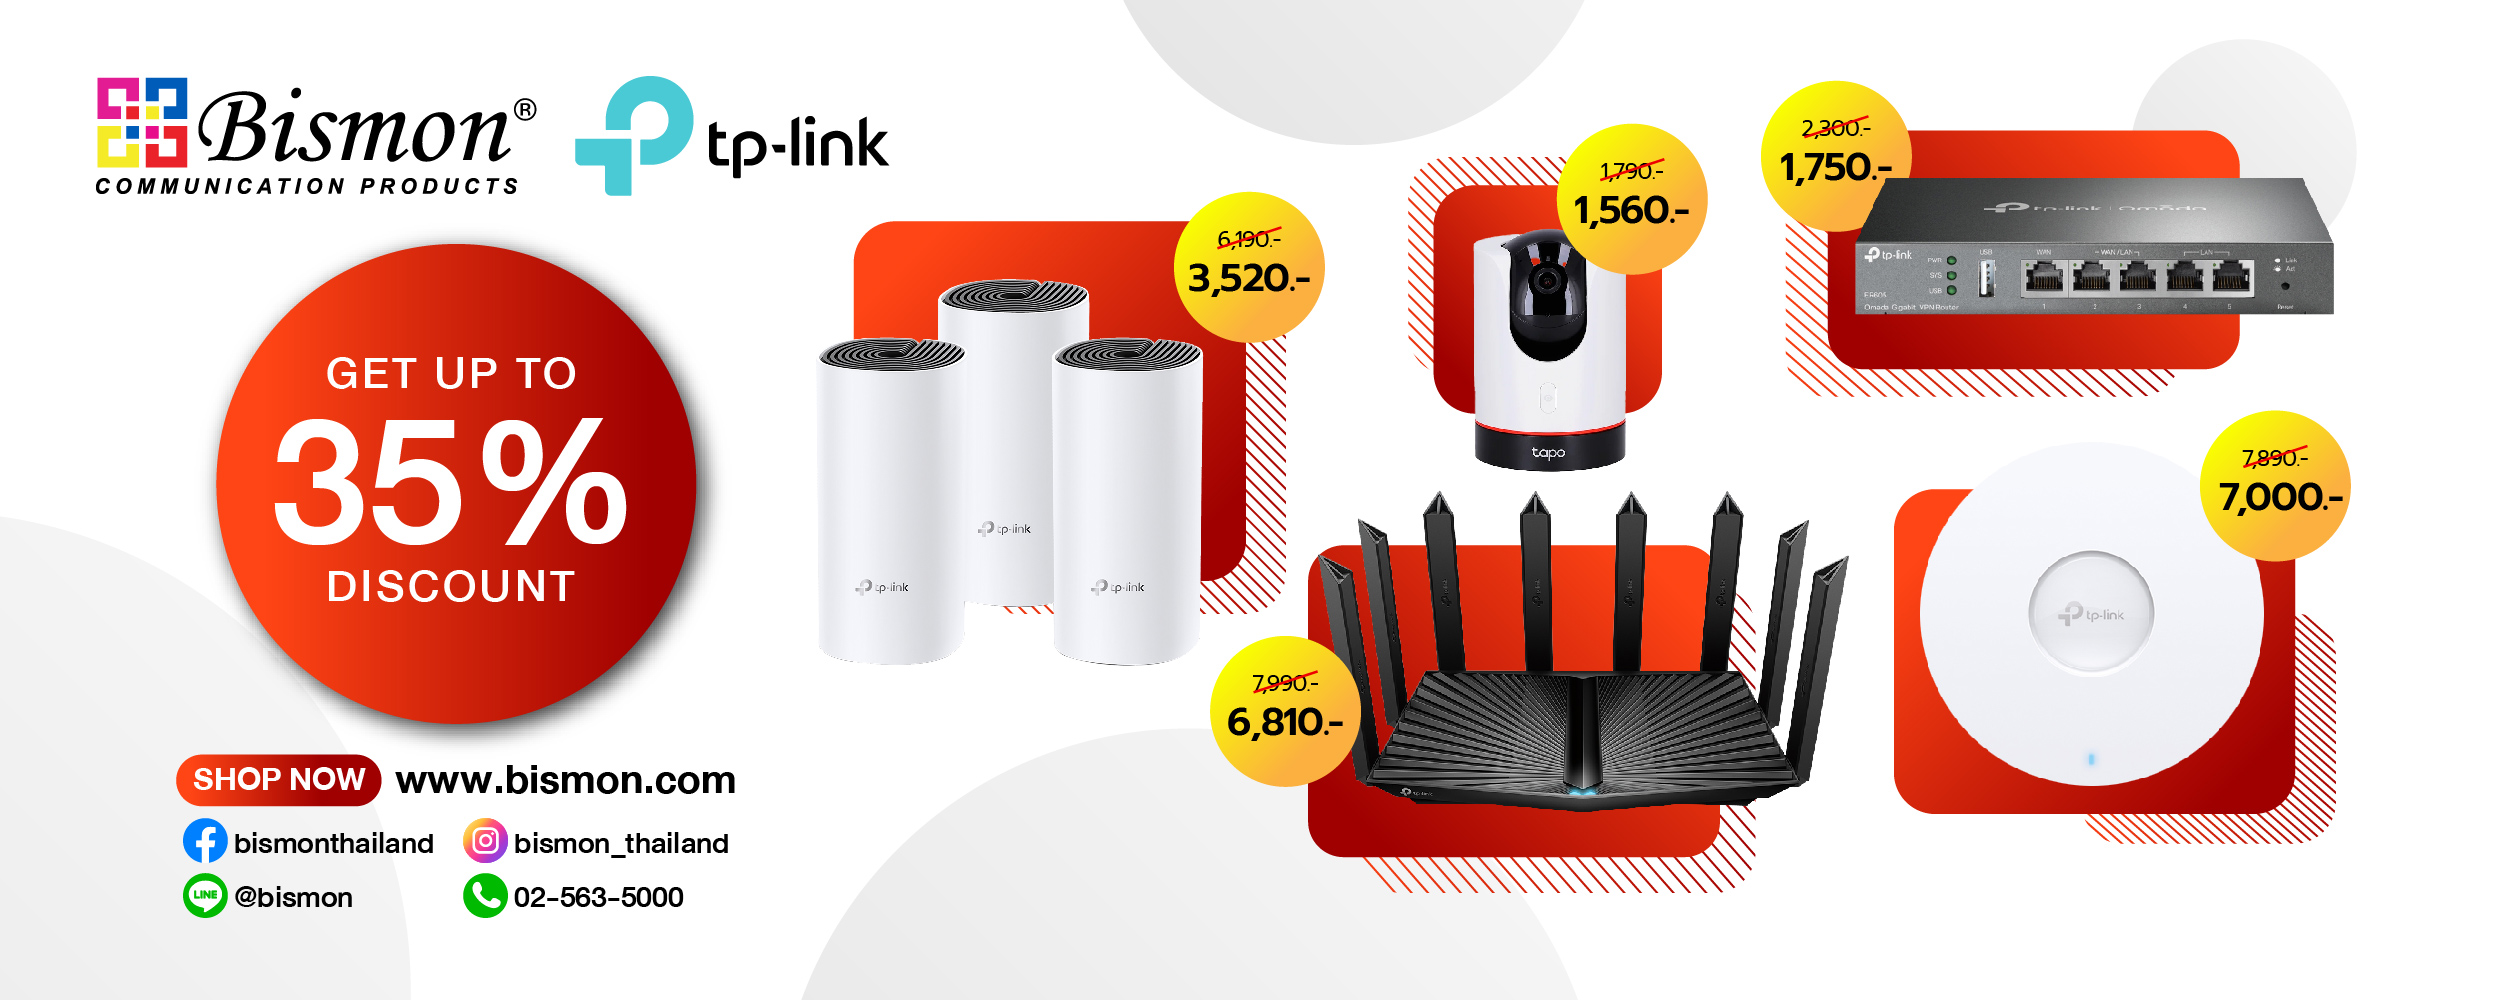 TP-Link GET UP TO 35% DISCOUNT